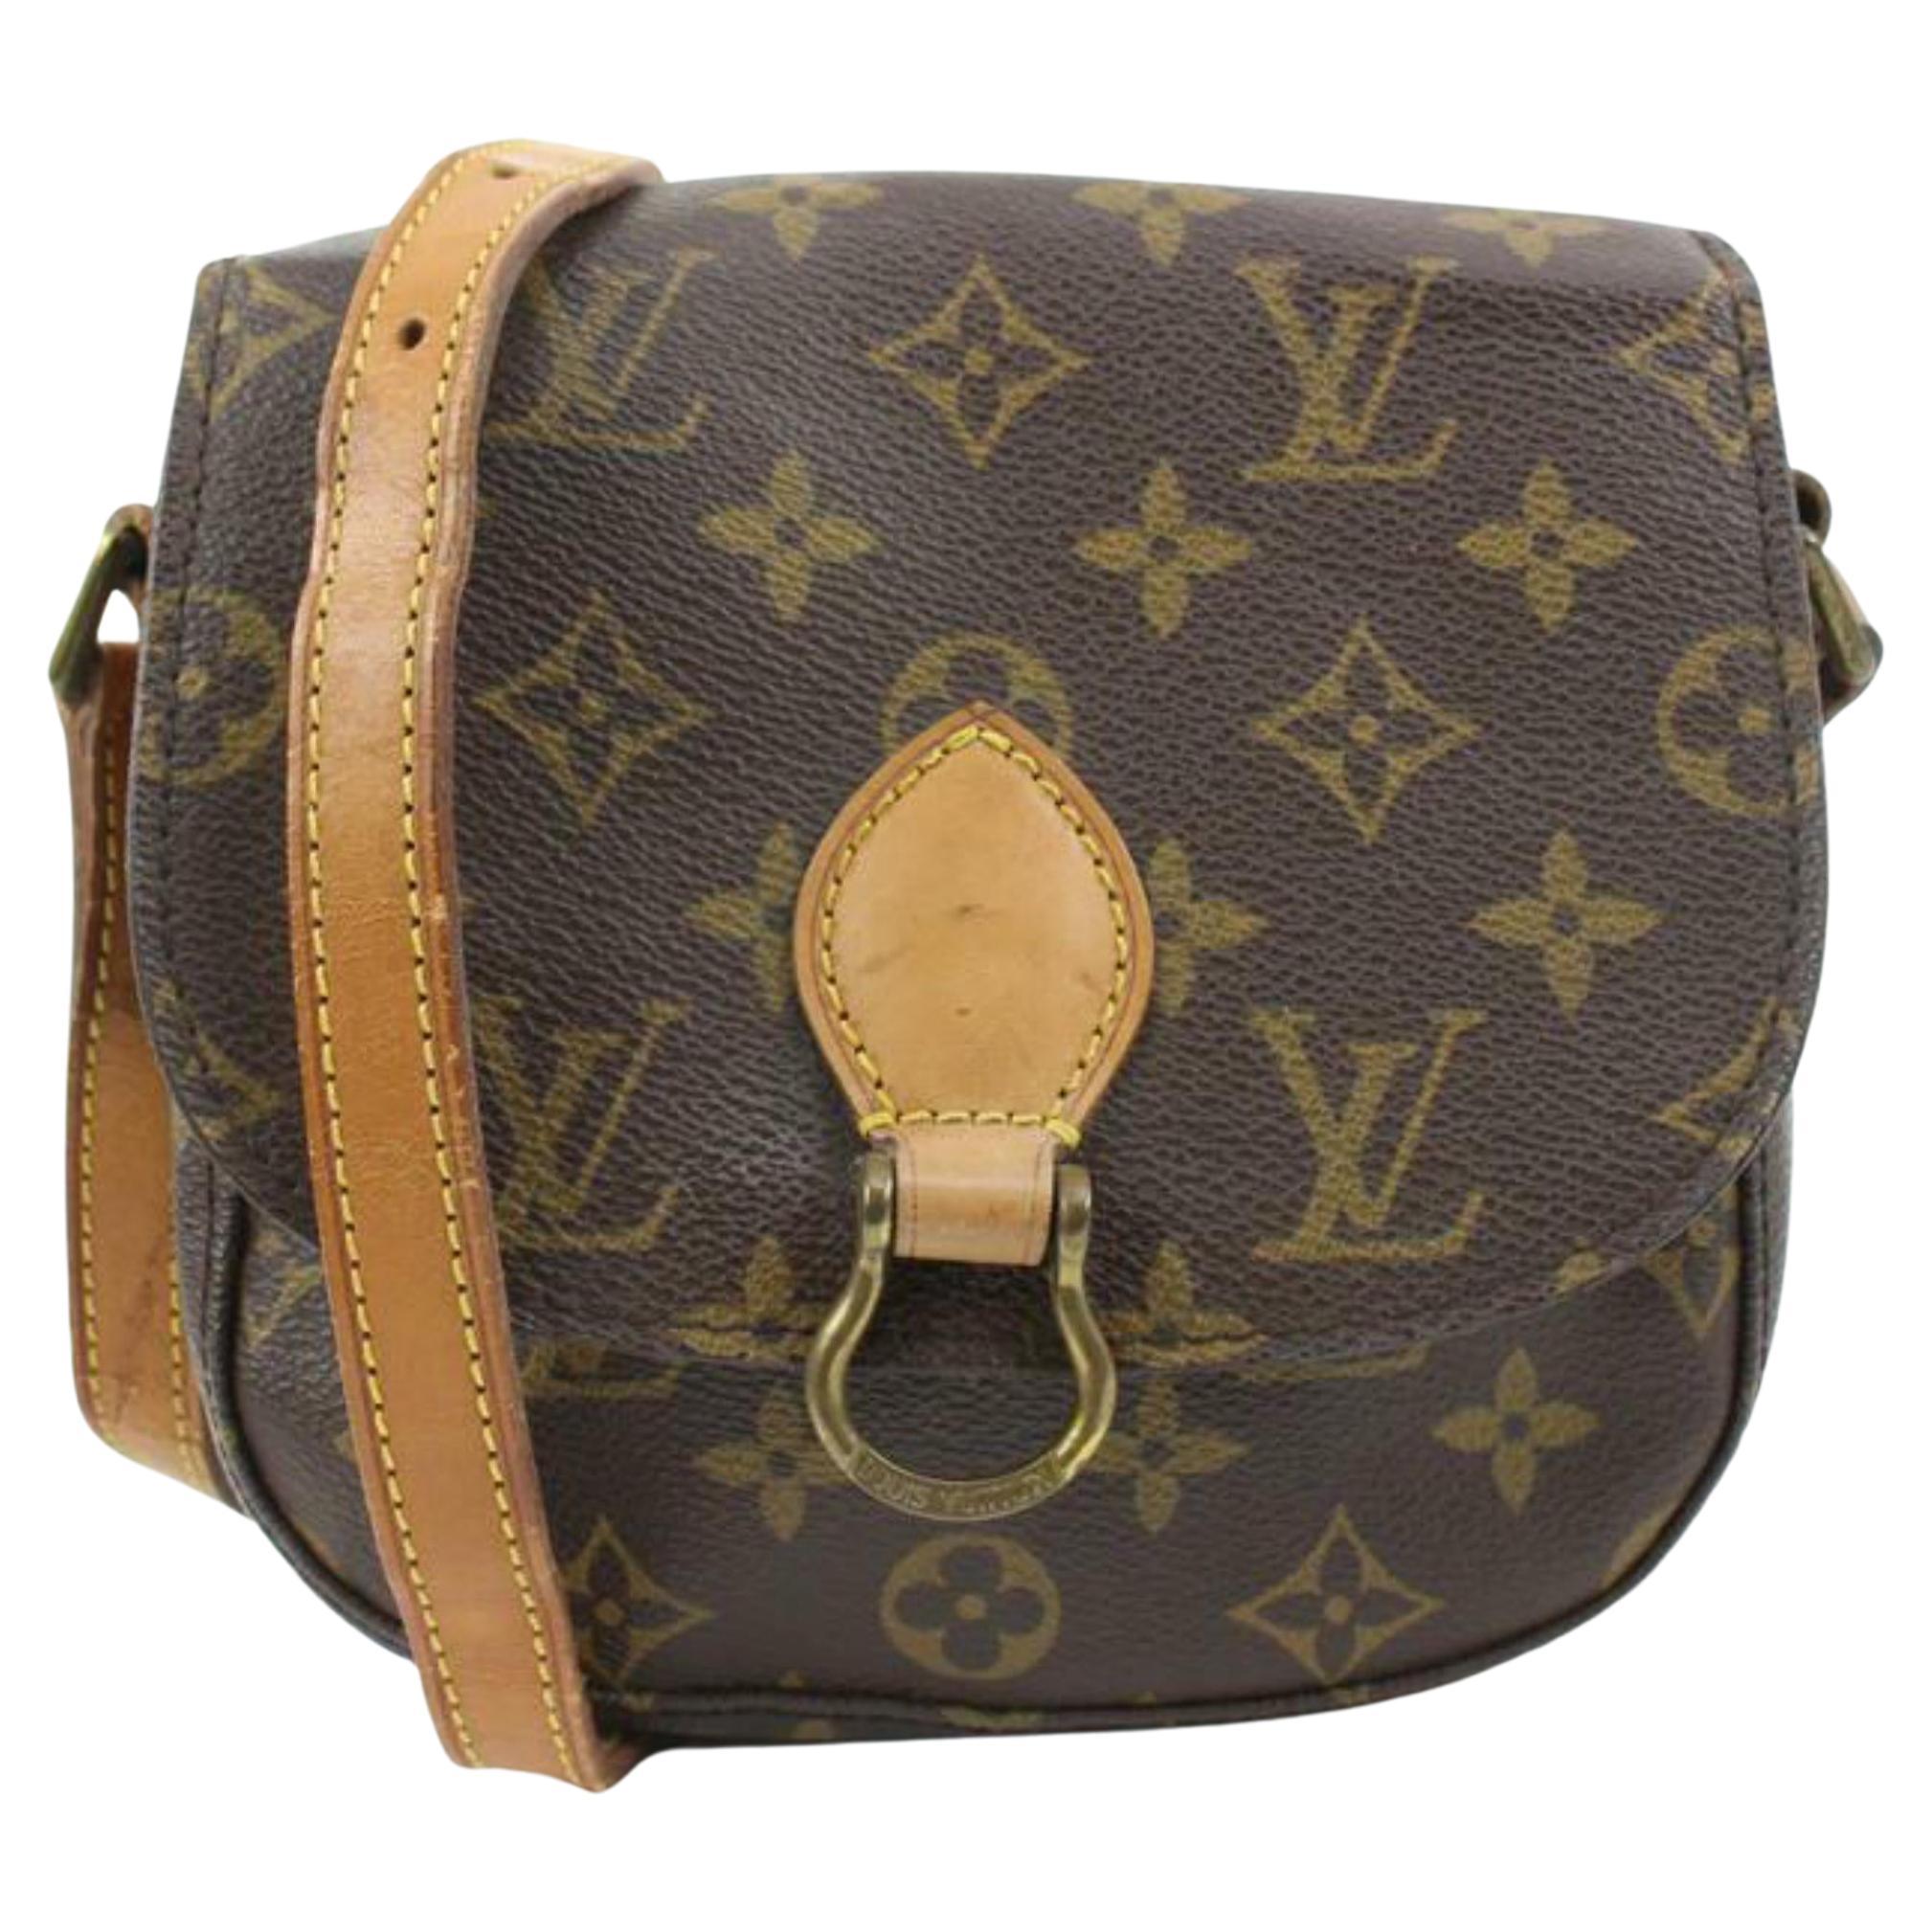 Vintage Louis Vuitton: Bags, Clothing & More - 8,324 For Sale at 